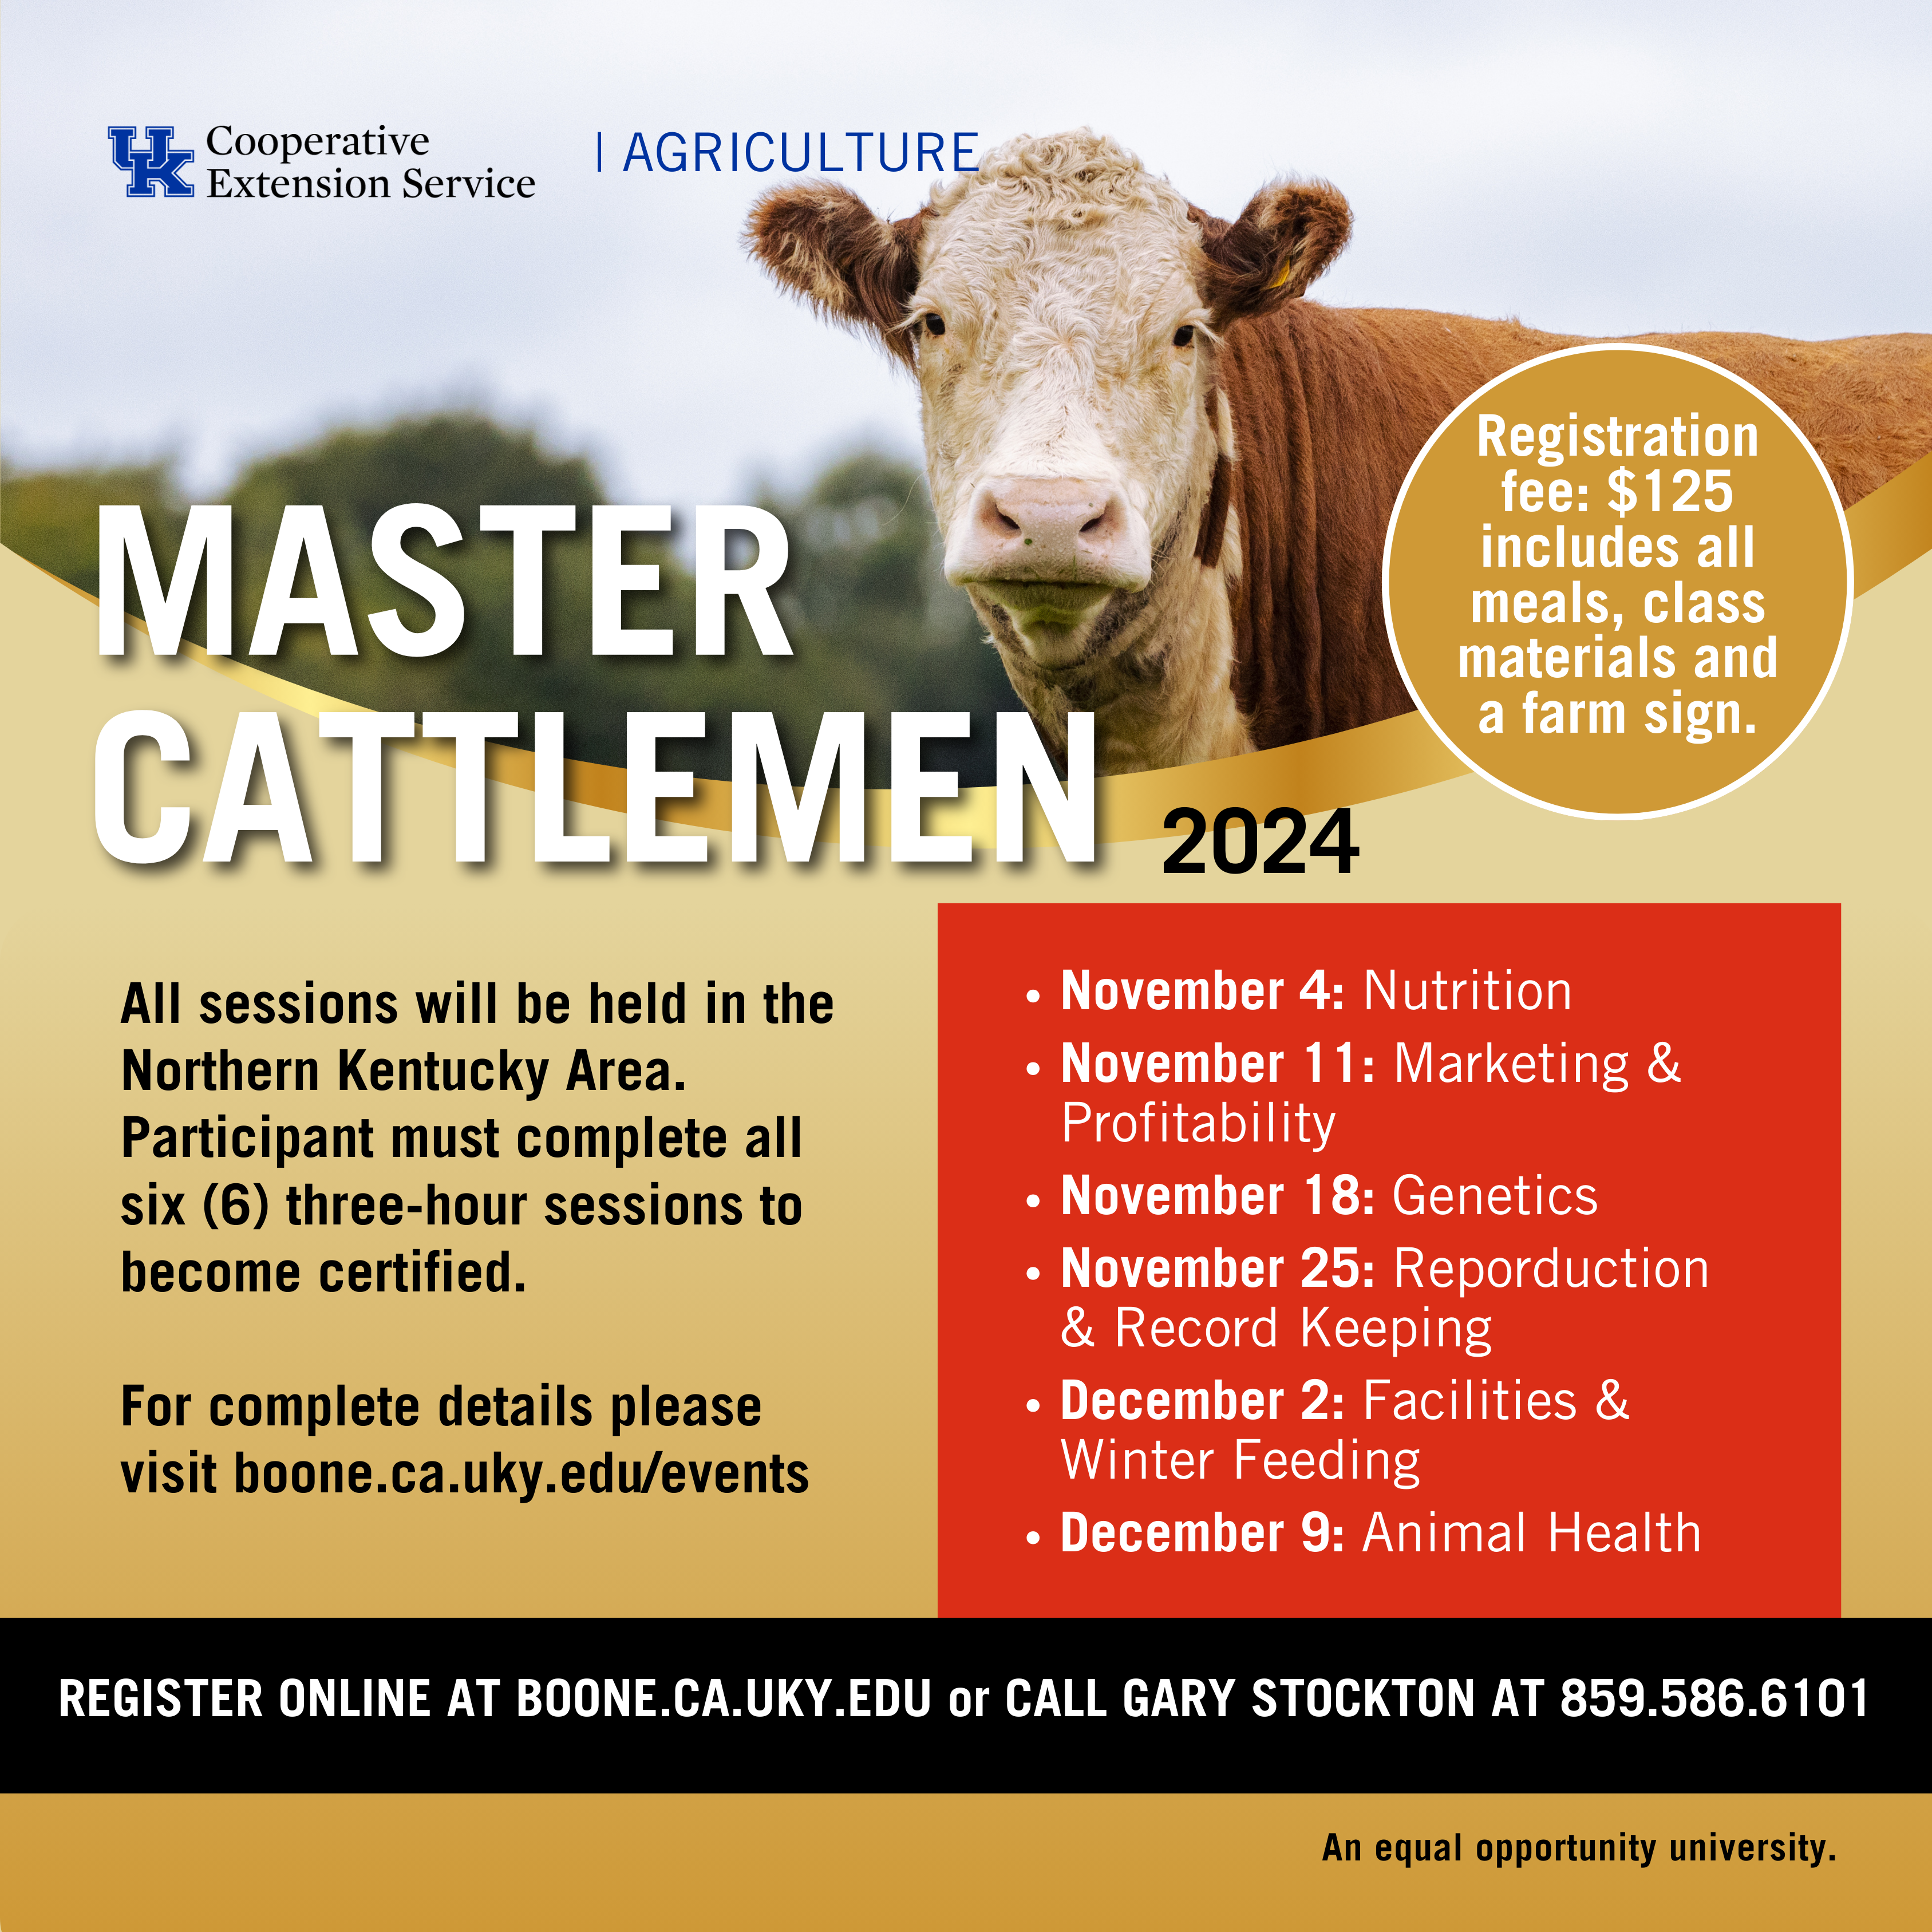 Master Cattlemen program advertisement. Registration fee: $125 includes all meals, class materials and a farm sign. All sessions will be held in the Northern Kentucky Area.  Participant must complete all six (6) three-hour sessions to become certified.  For complete details please visit boone.ca.uky.edu/events November 4: Nutrition  November 11: Marketing & Profitability November 18: Genetics November 25: Reporduction & Record Keeping December 2: Facilities & Winter Feeding December 9: Animal Health